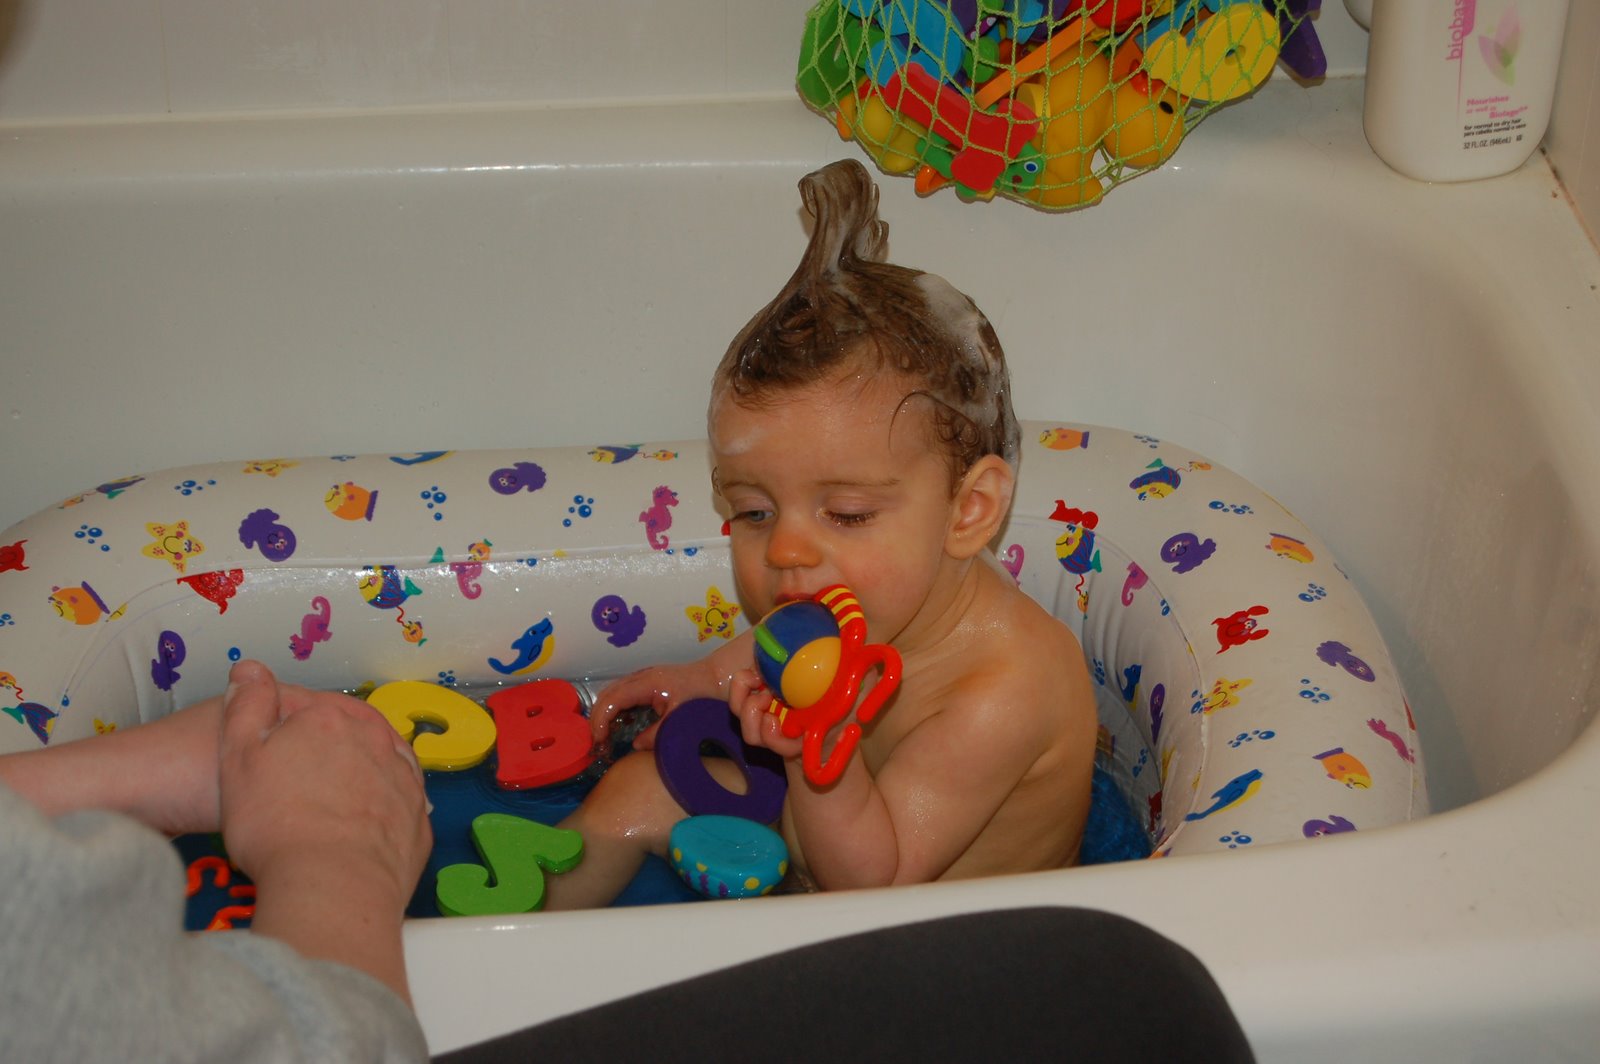 There's gotta be some carrots in this bath toy!